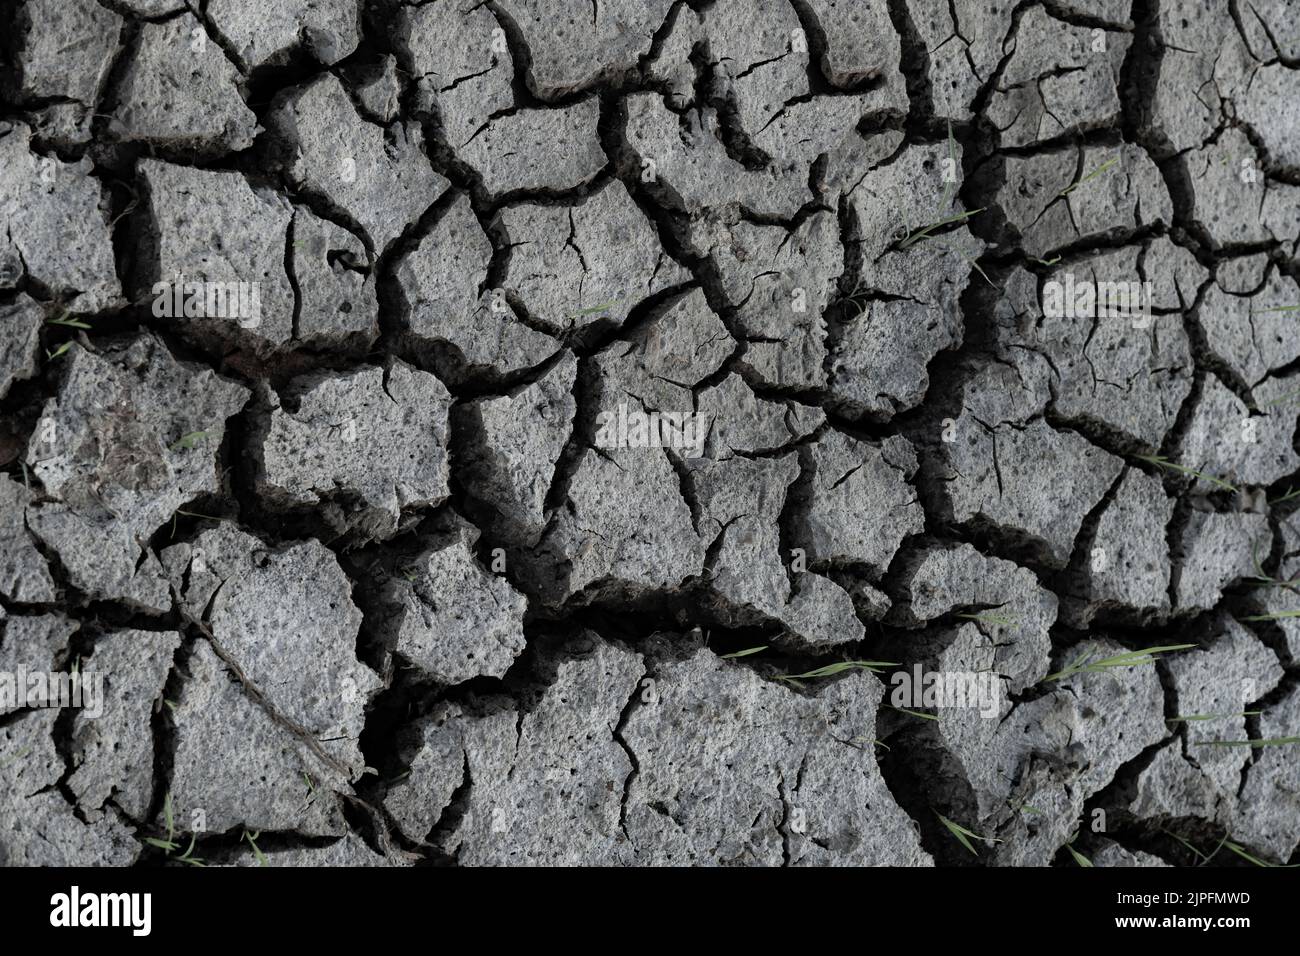 cracked and dried mud as background and texture Stock Photo